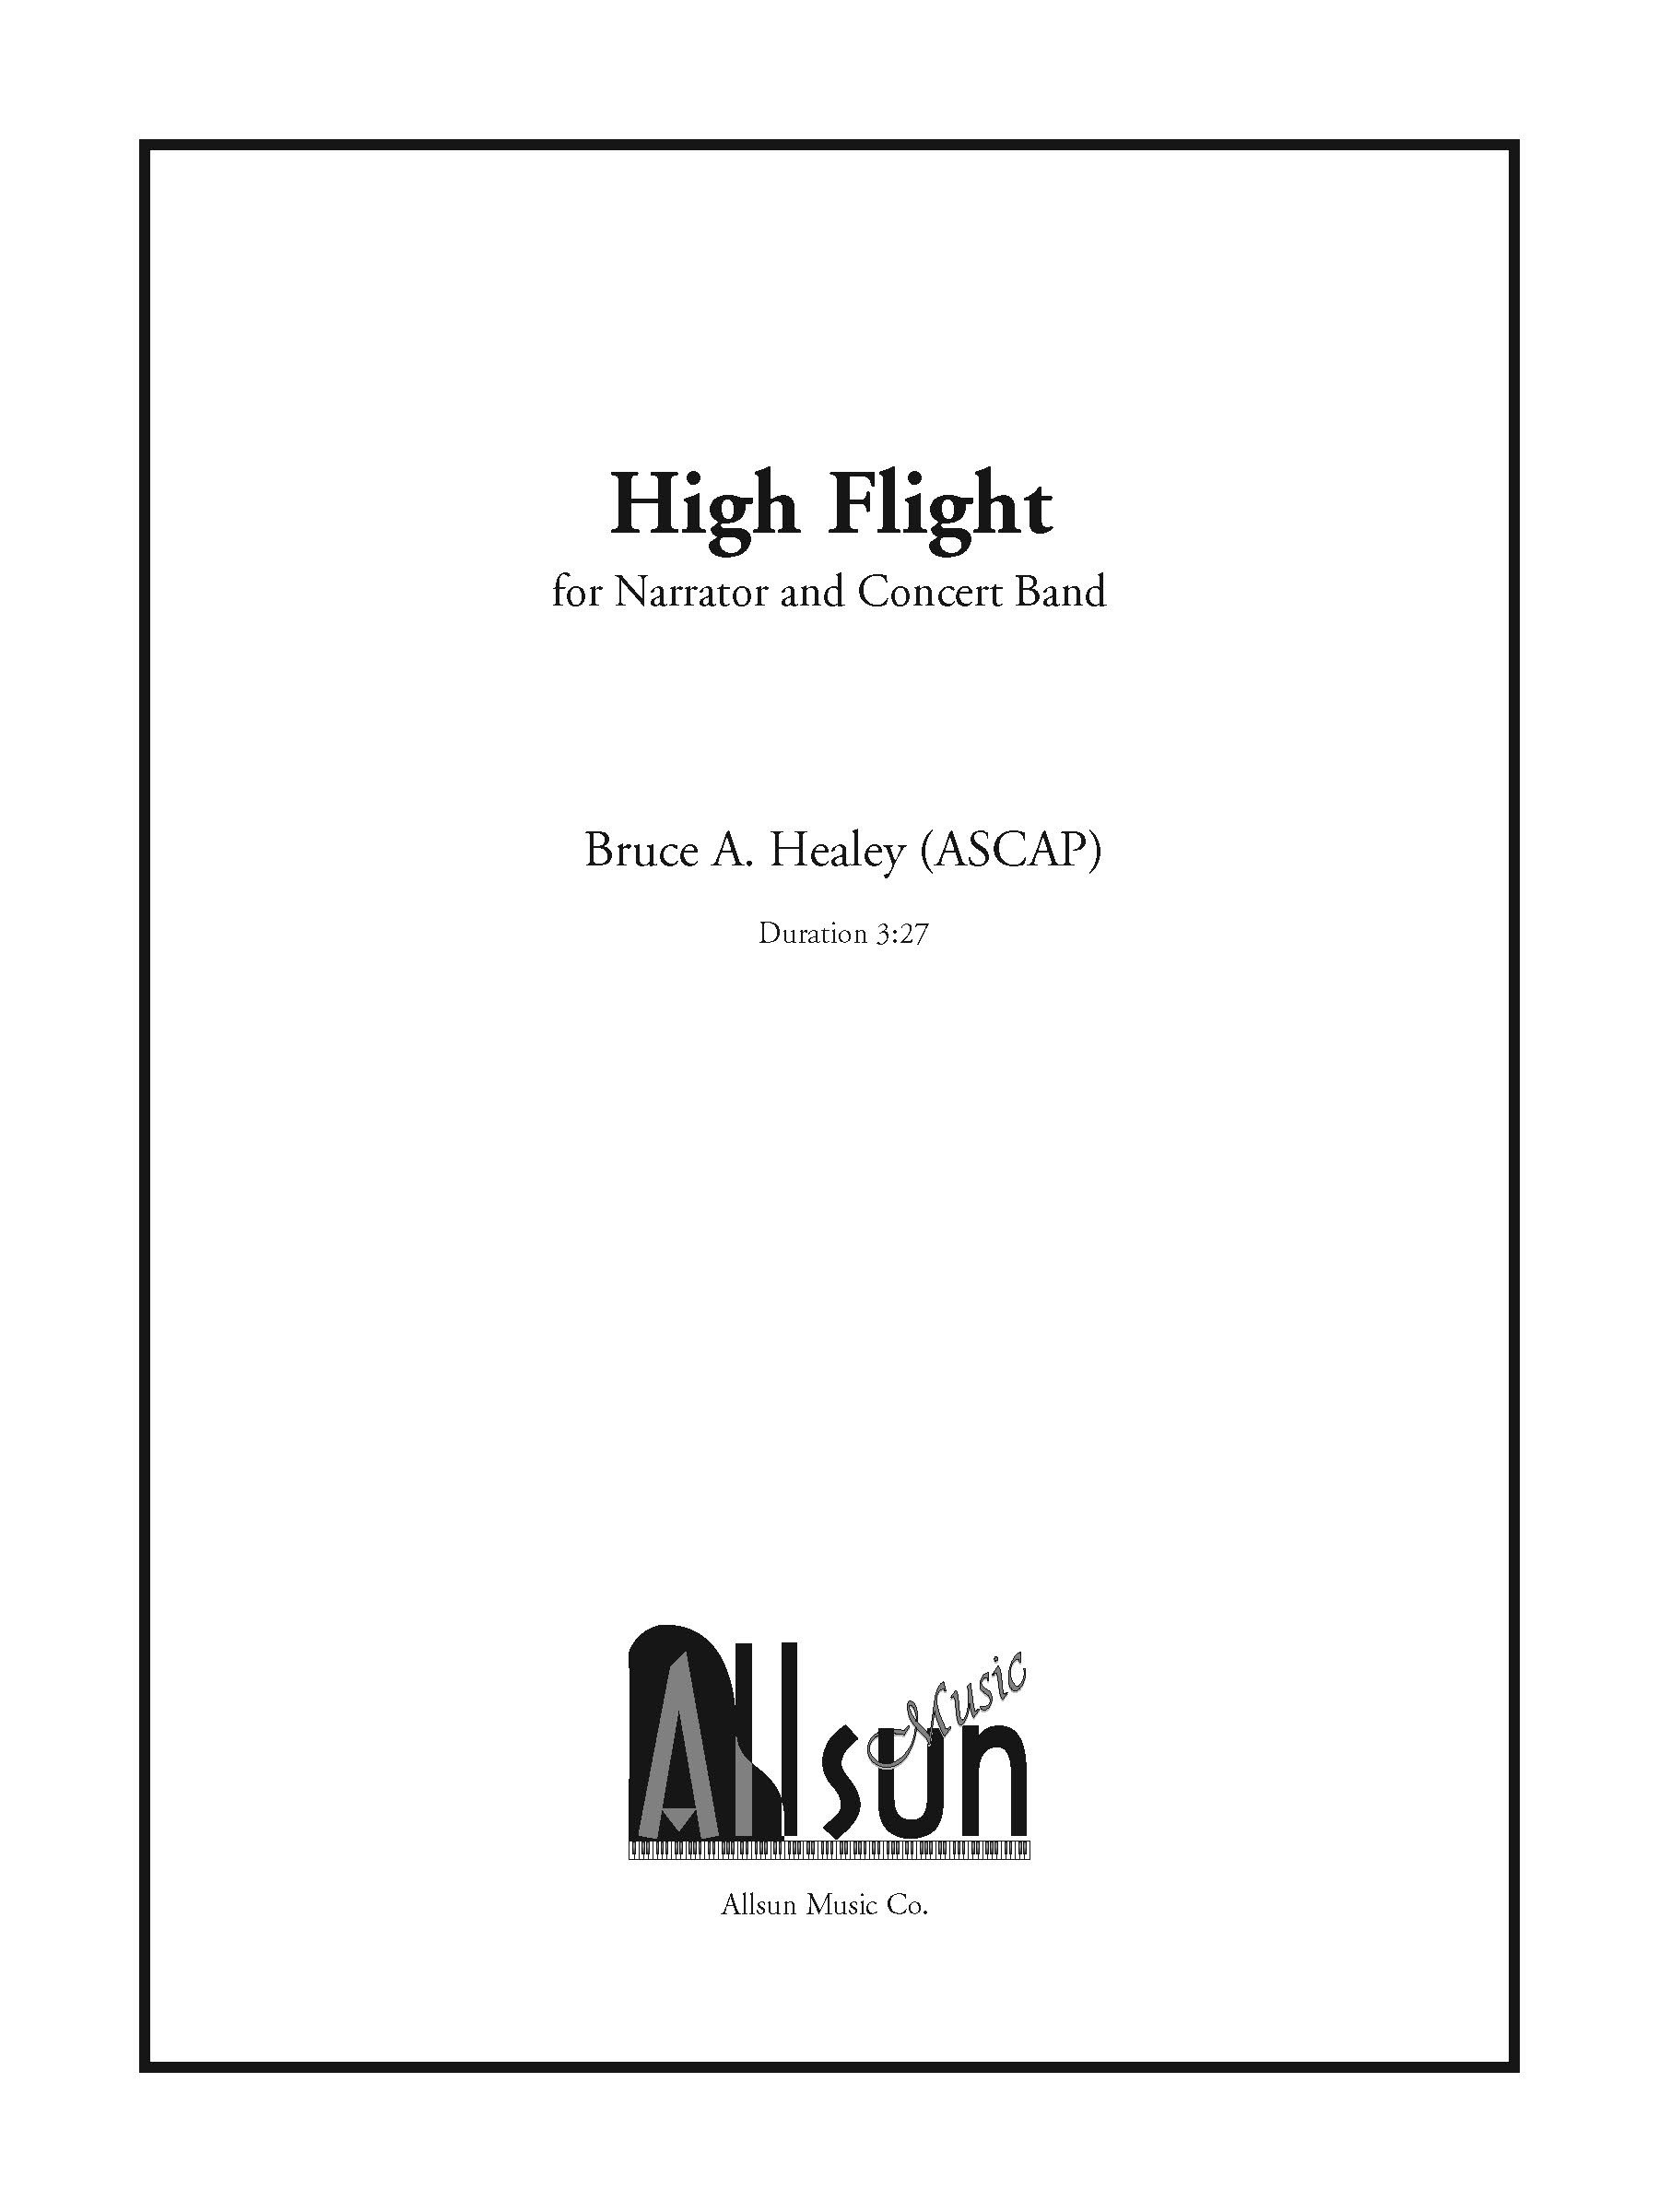 High Flight for Narrator and Concert Band